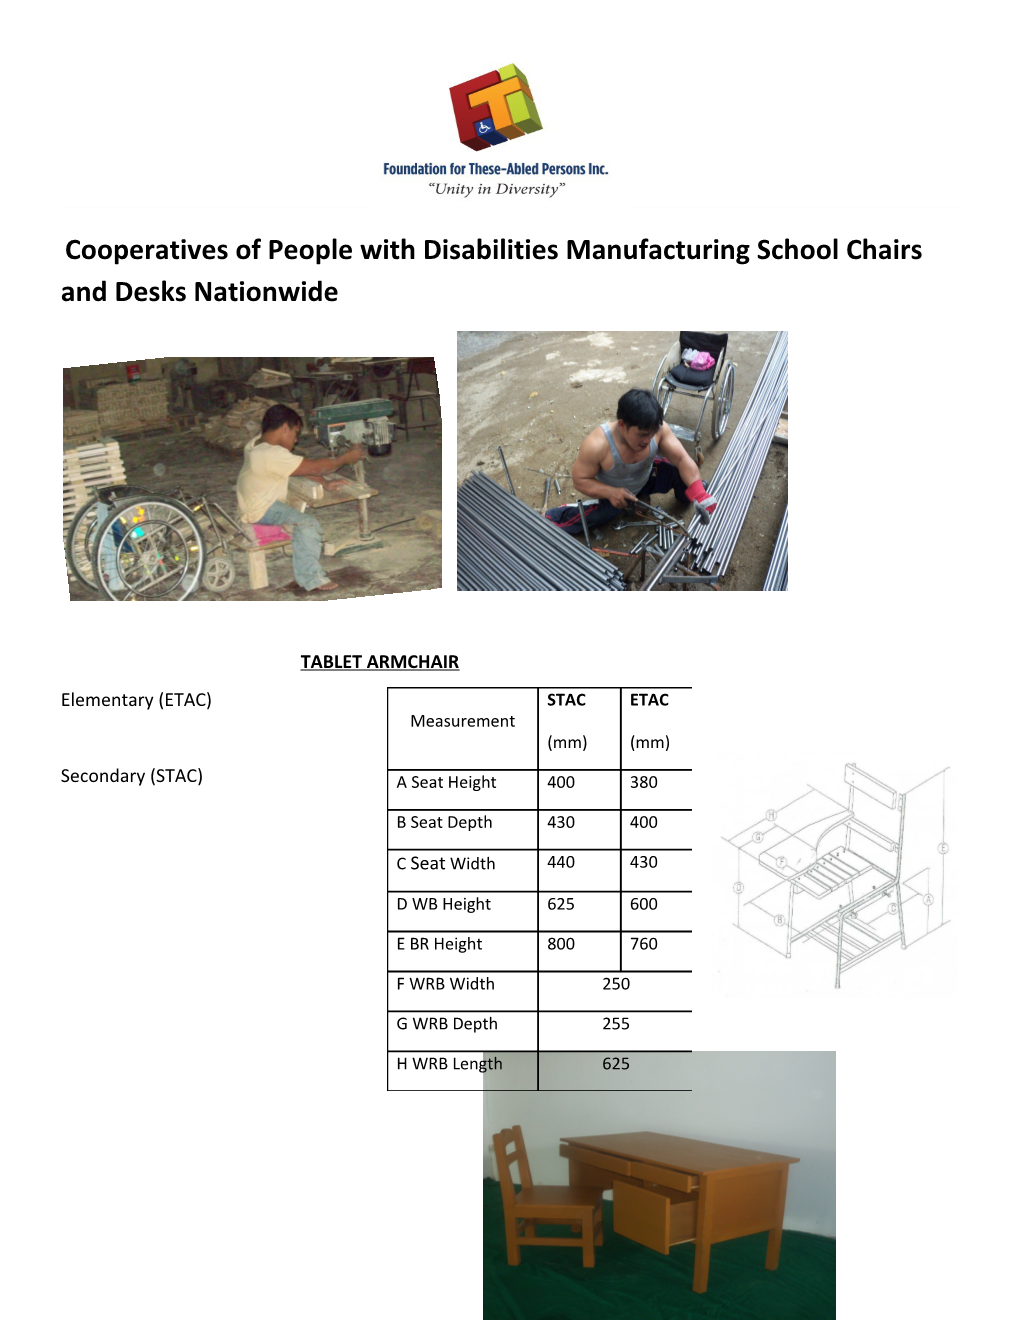 Cooperatives of People with Disabilities Manufacturing School Chairs and Desks Nationwide